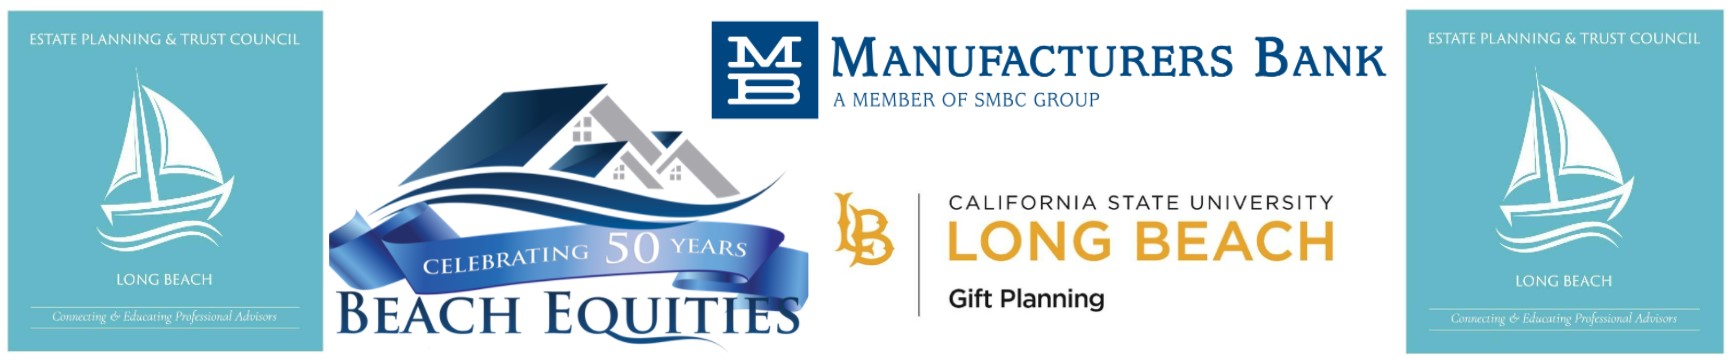 Annual Sponsors: Steve Fingerhut & Paige Fingerhut,CSULB OFfice of Planned Giving, and Manufacturers Bank